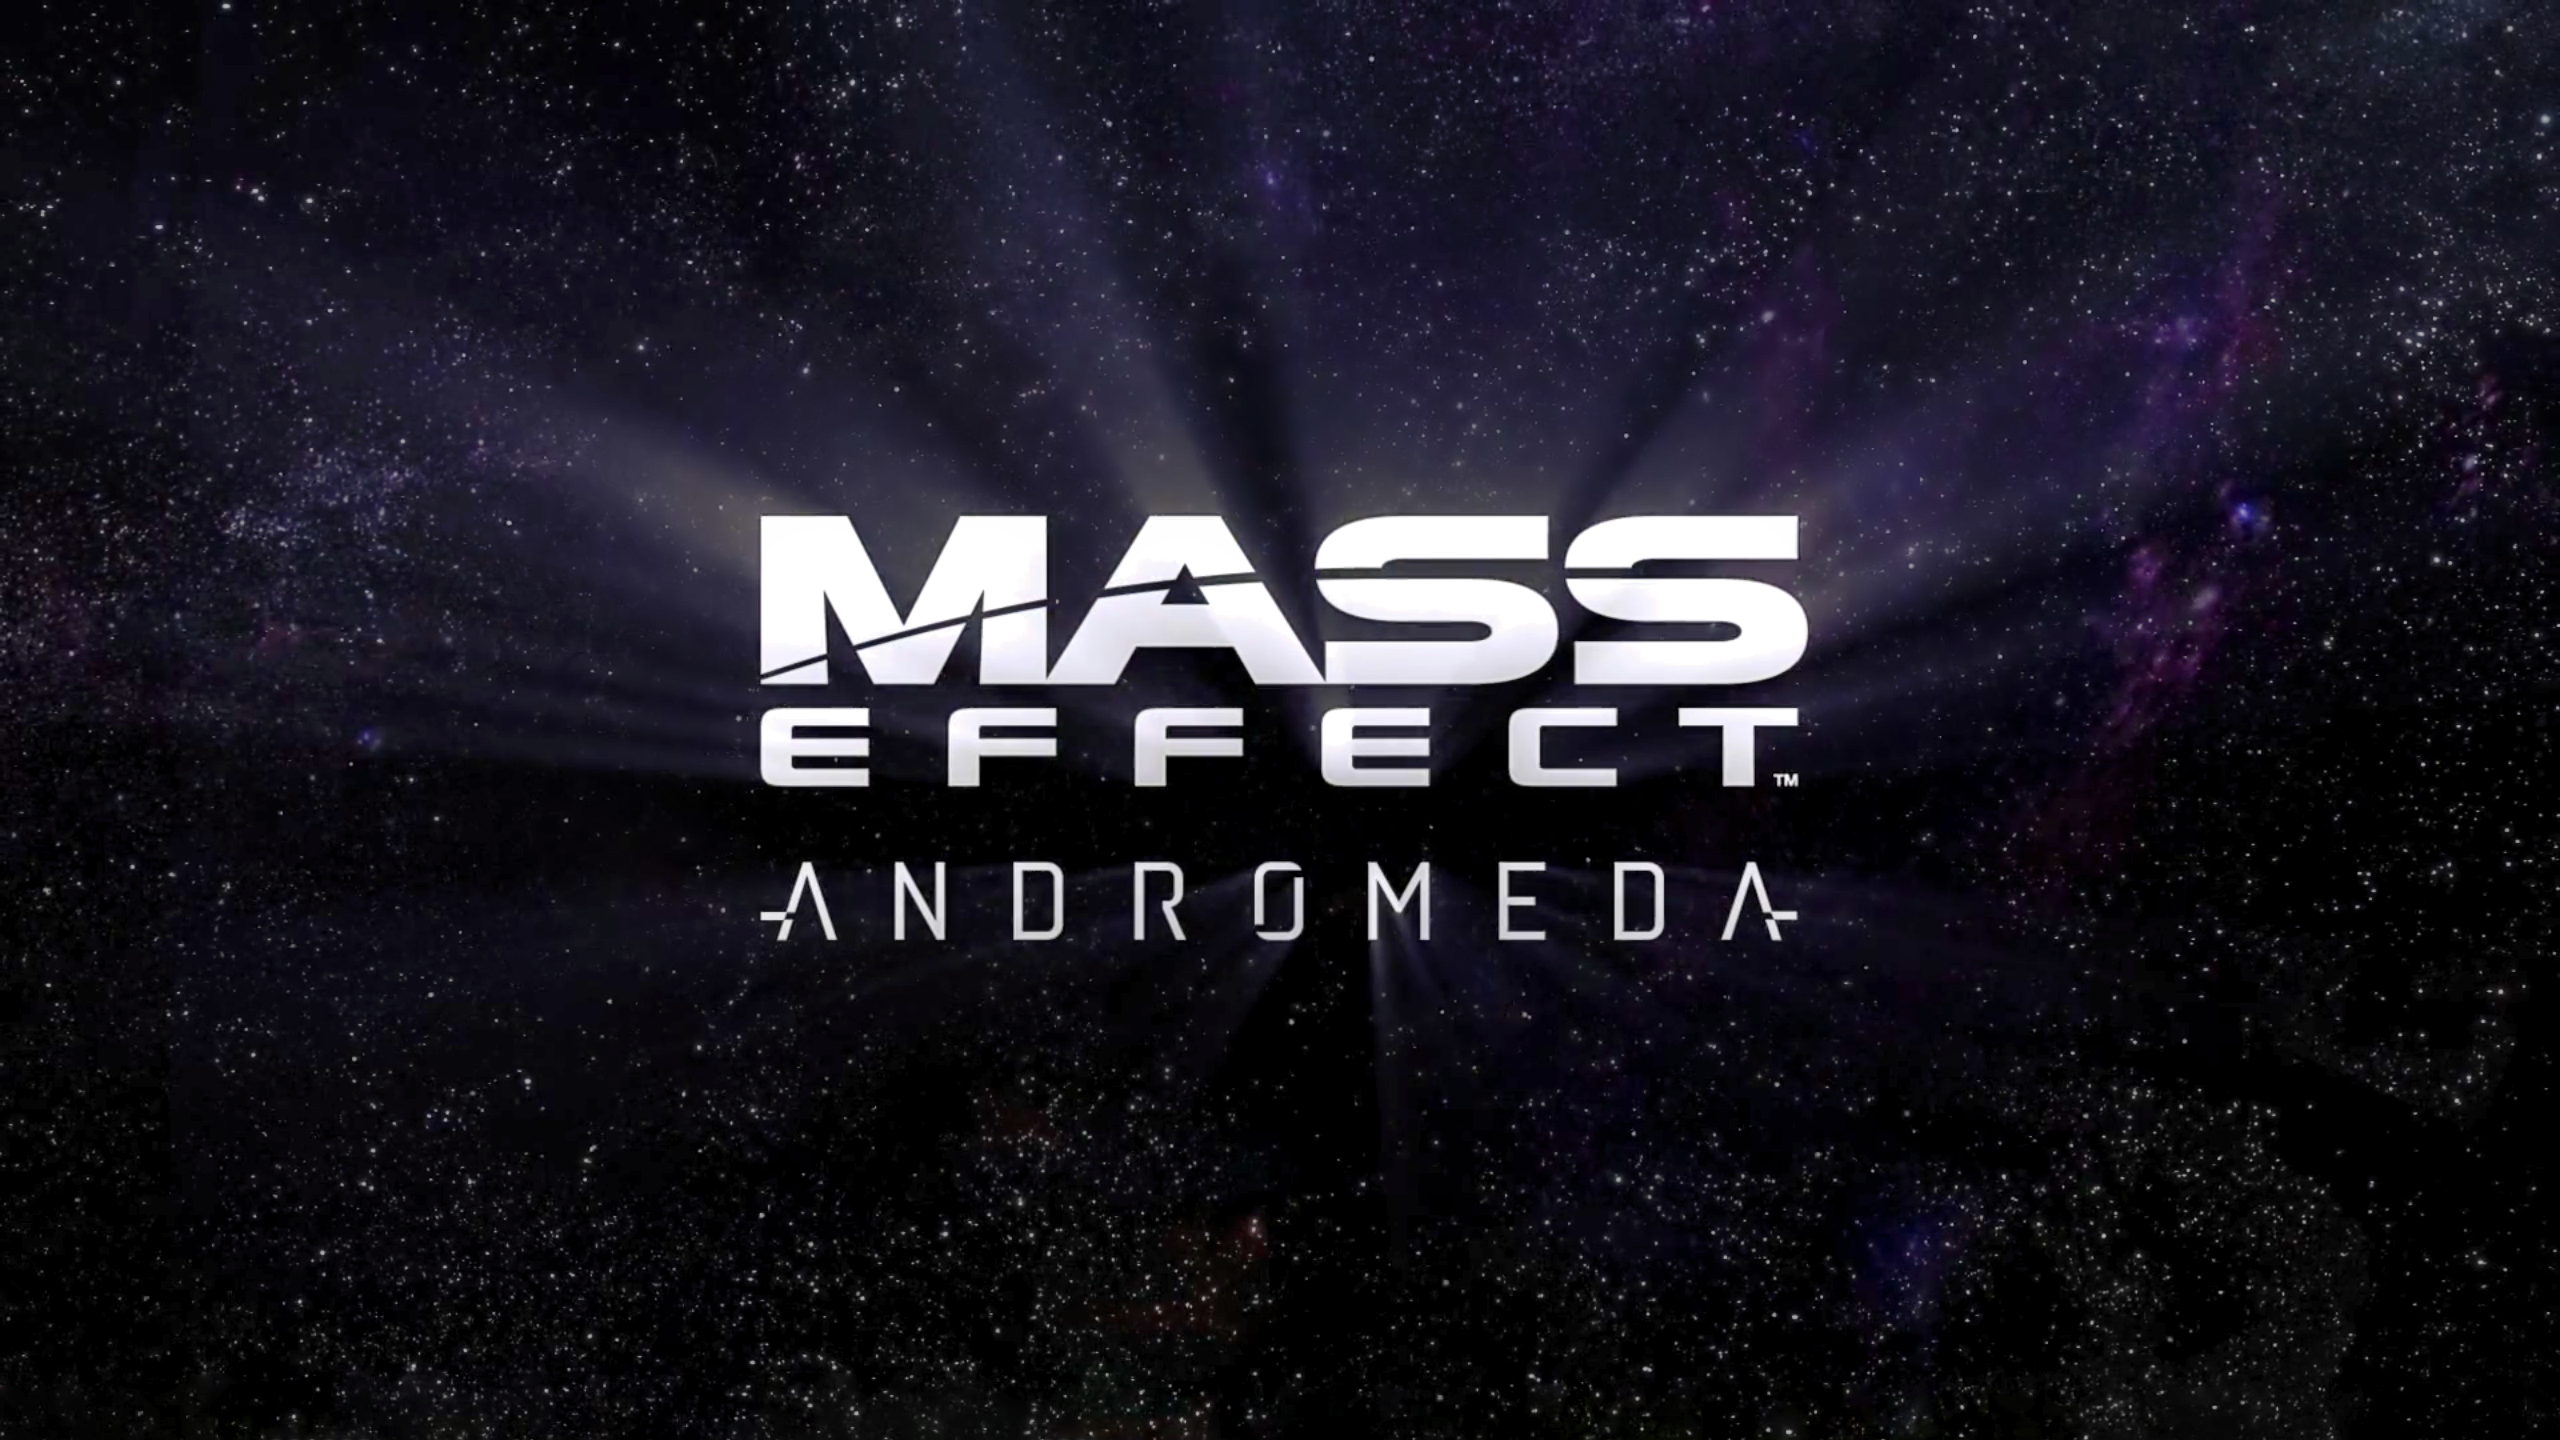 General 2560x1440 Mass Effect Mass Effect: Andromeda video games PC gaming